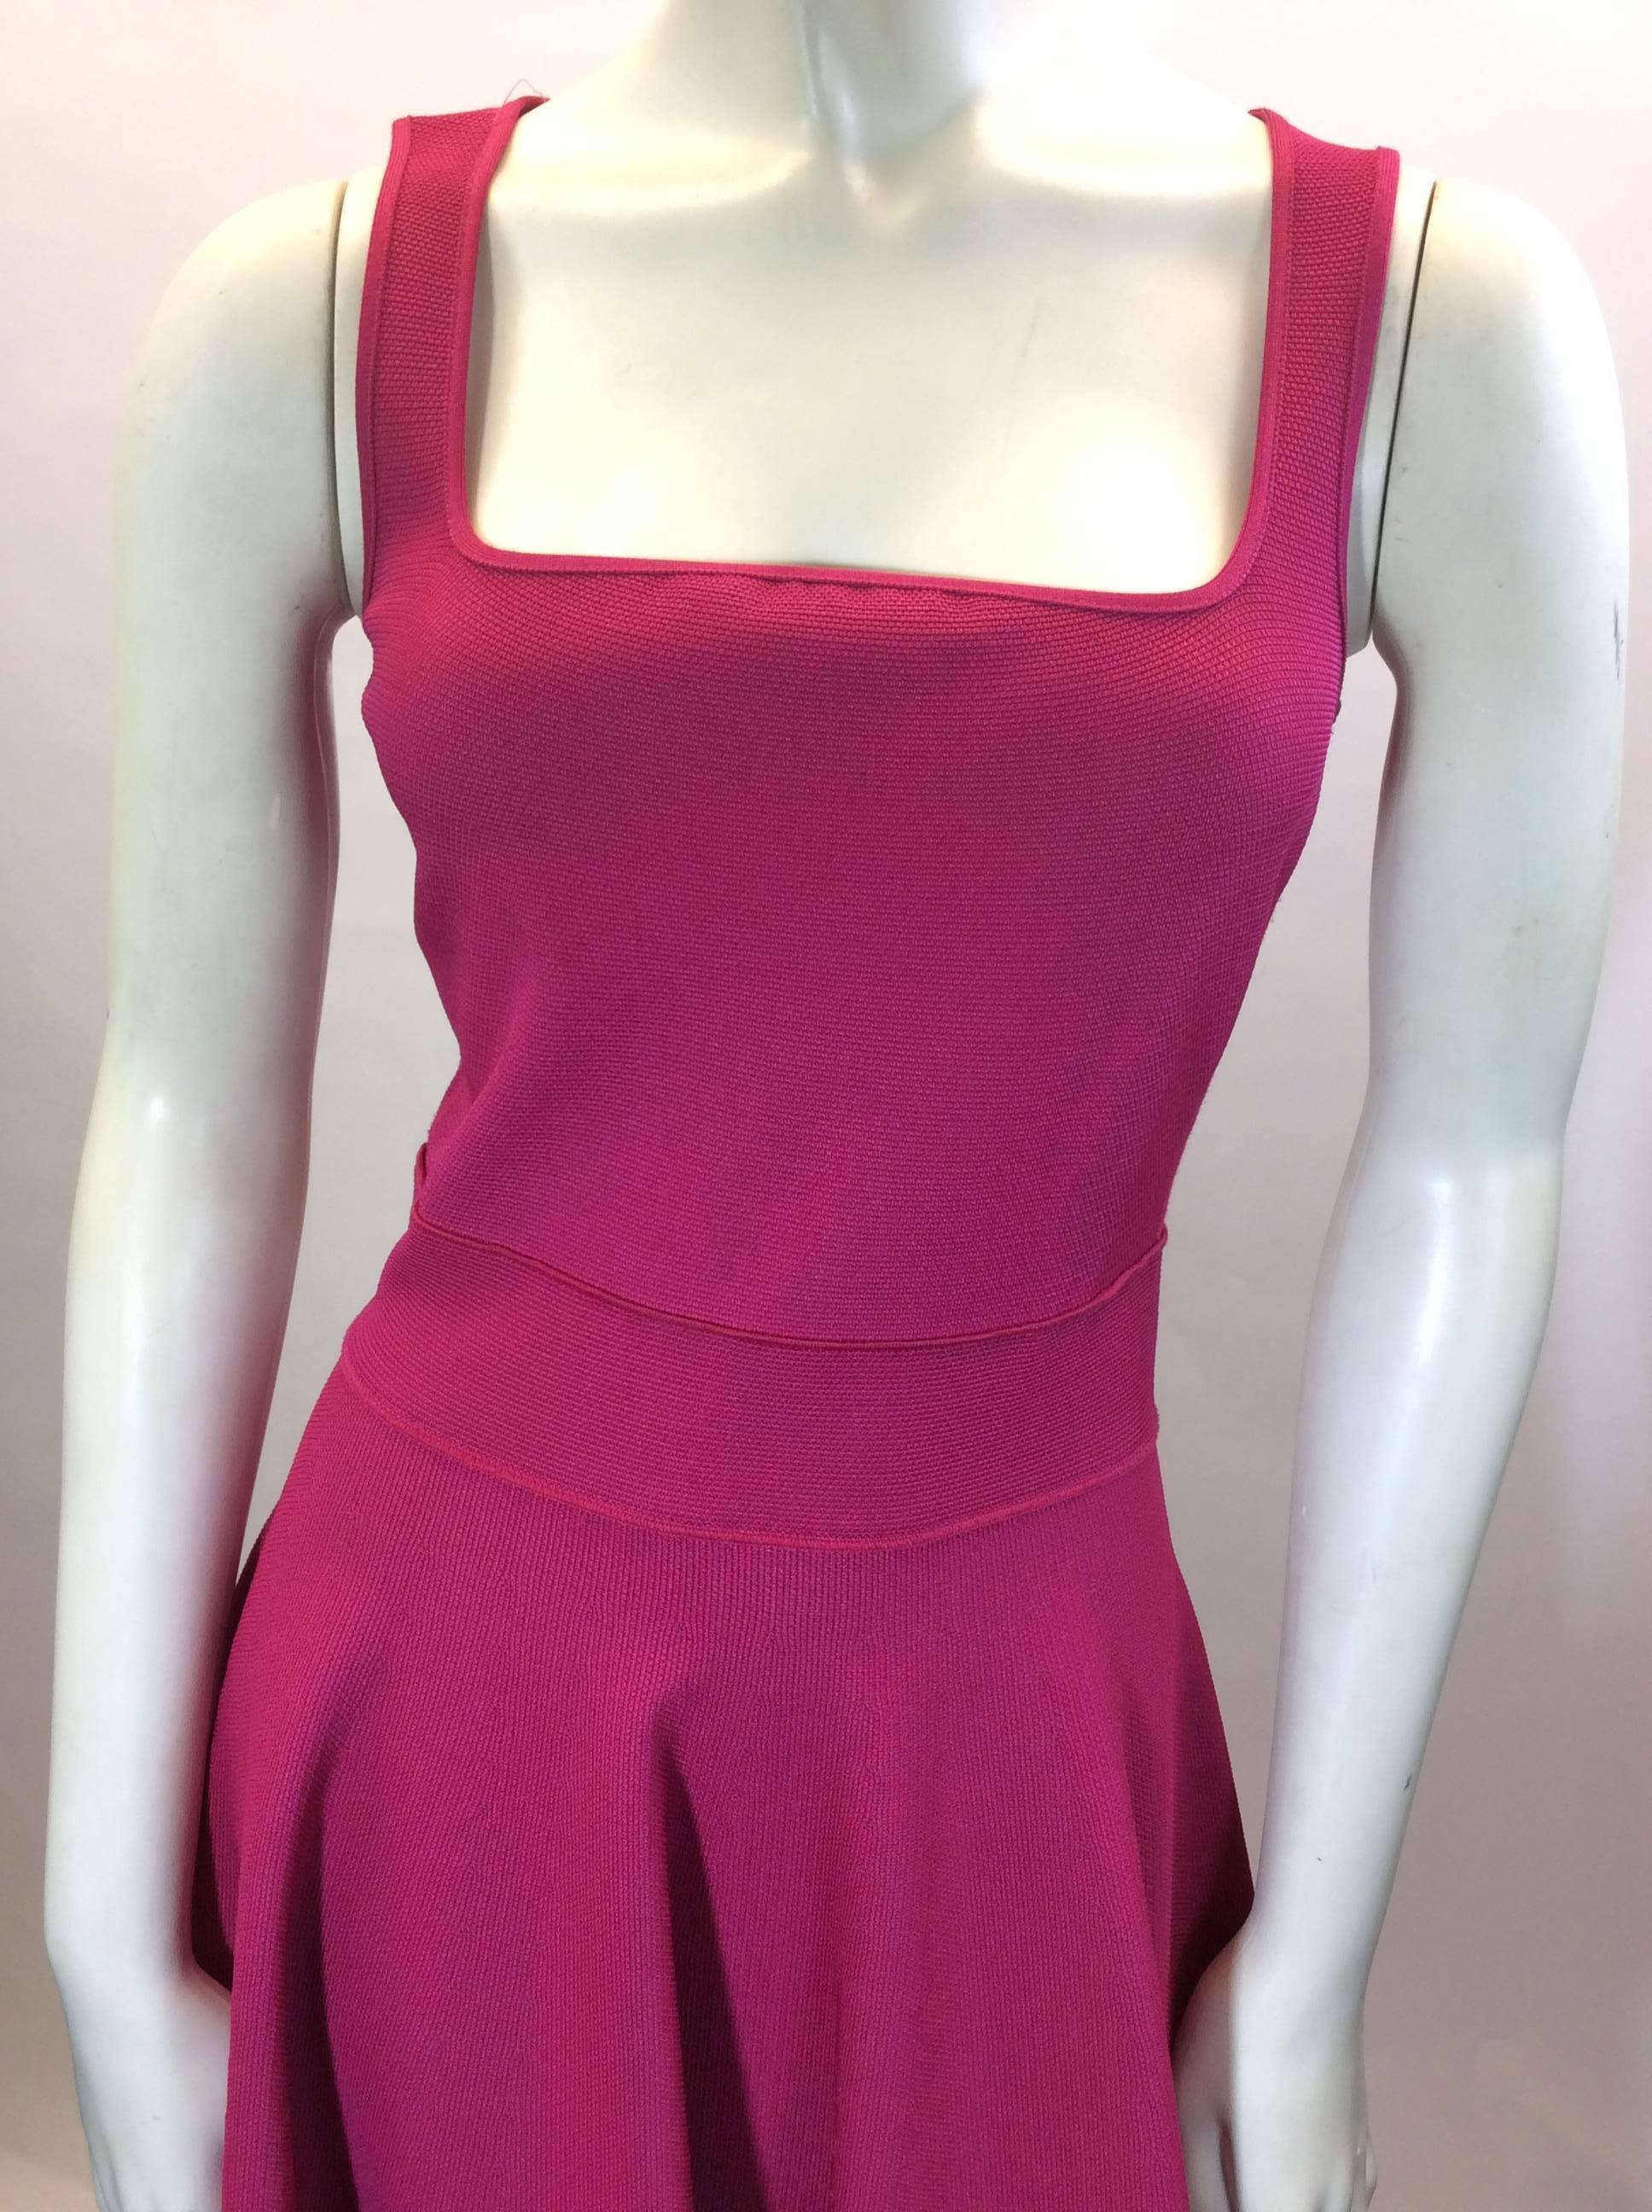 Fit and Flare Shape
Square Neckline
Fitted Waist Band 
Unlined
Pull over no zipper
85% Viscose 12%Polymaide 3% Elastic 
